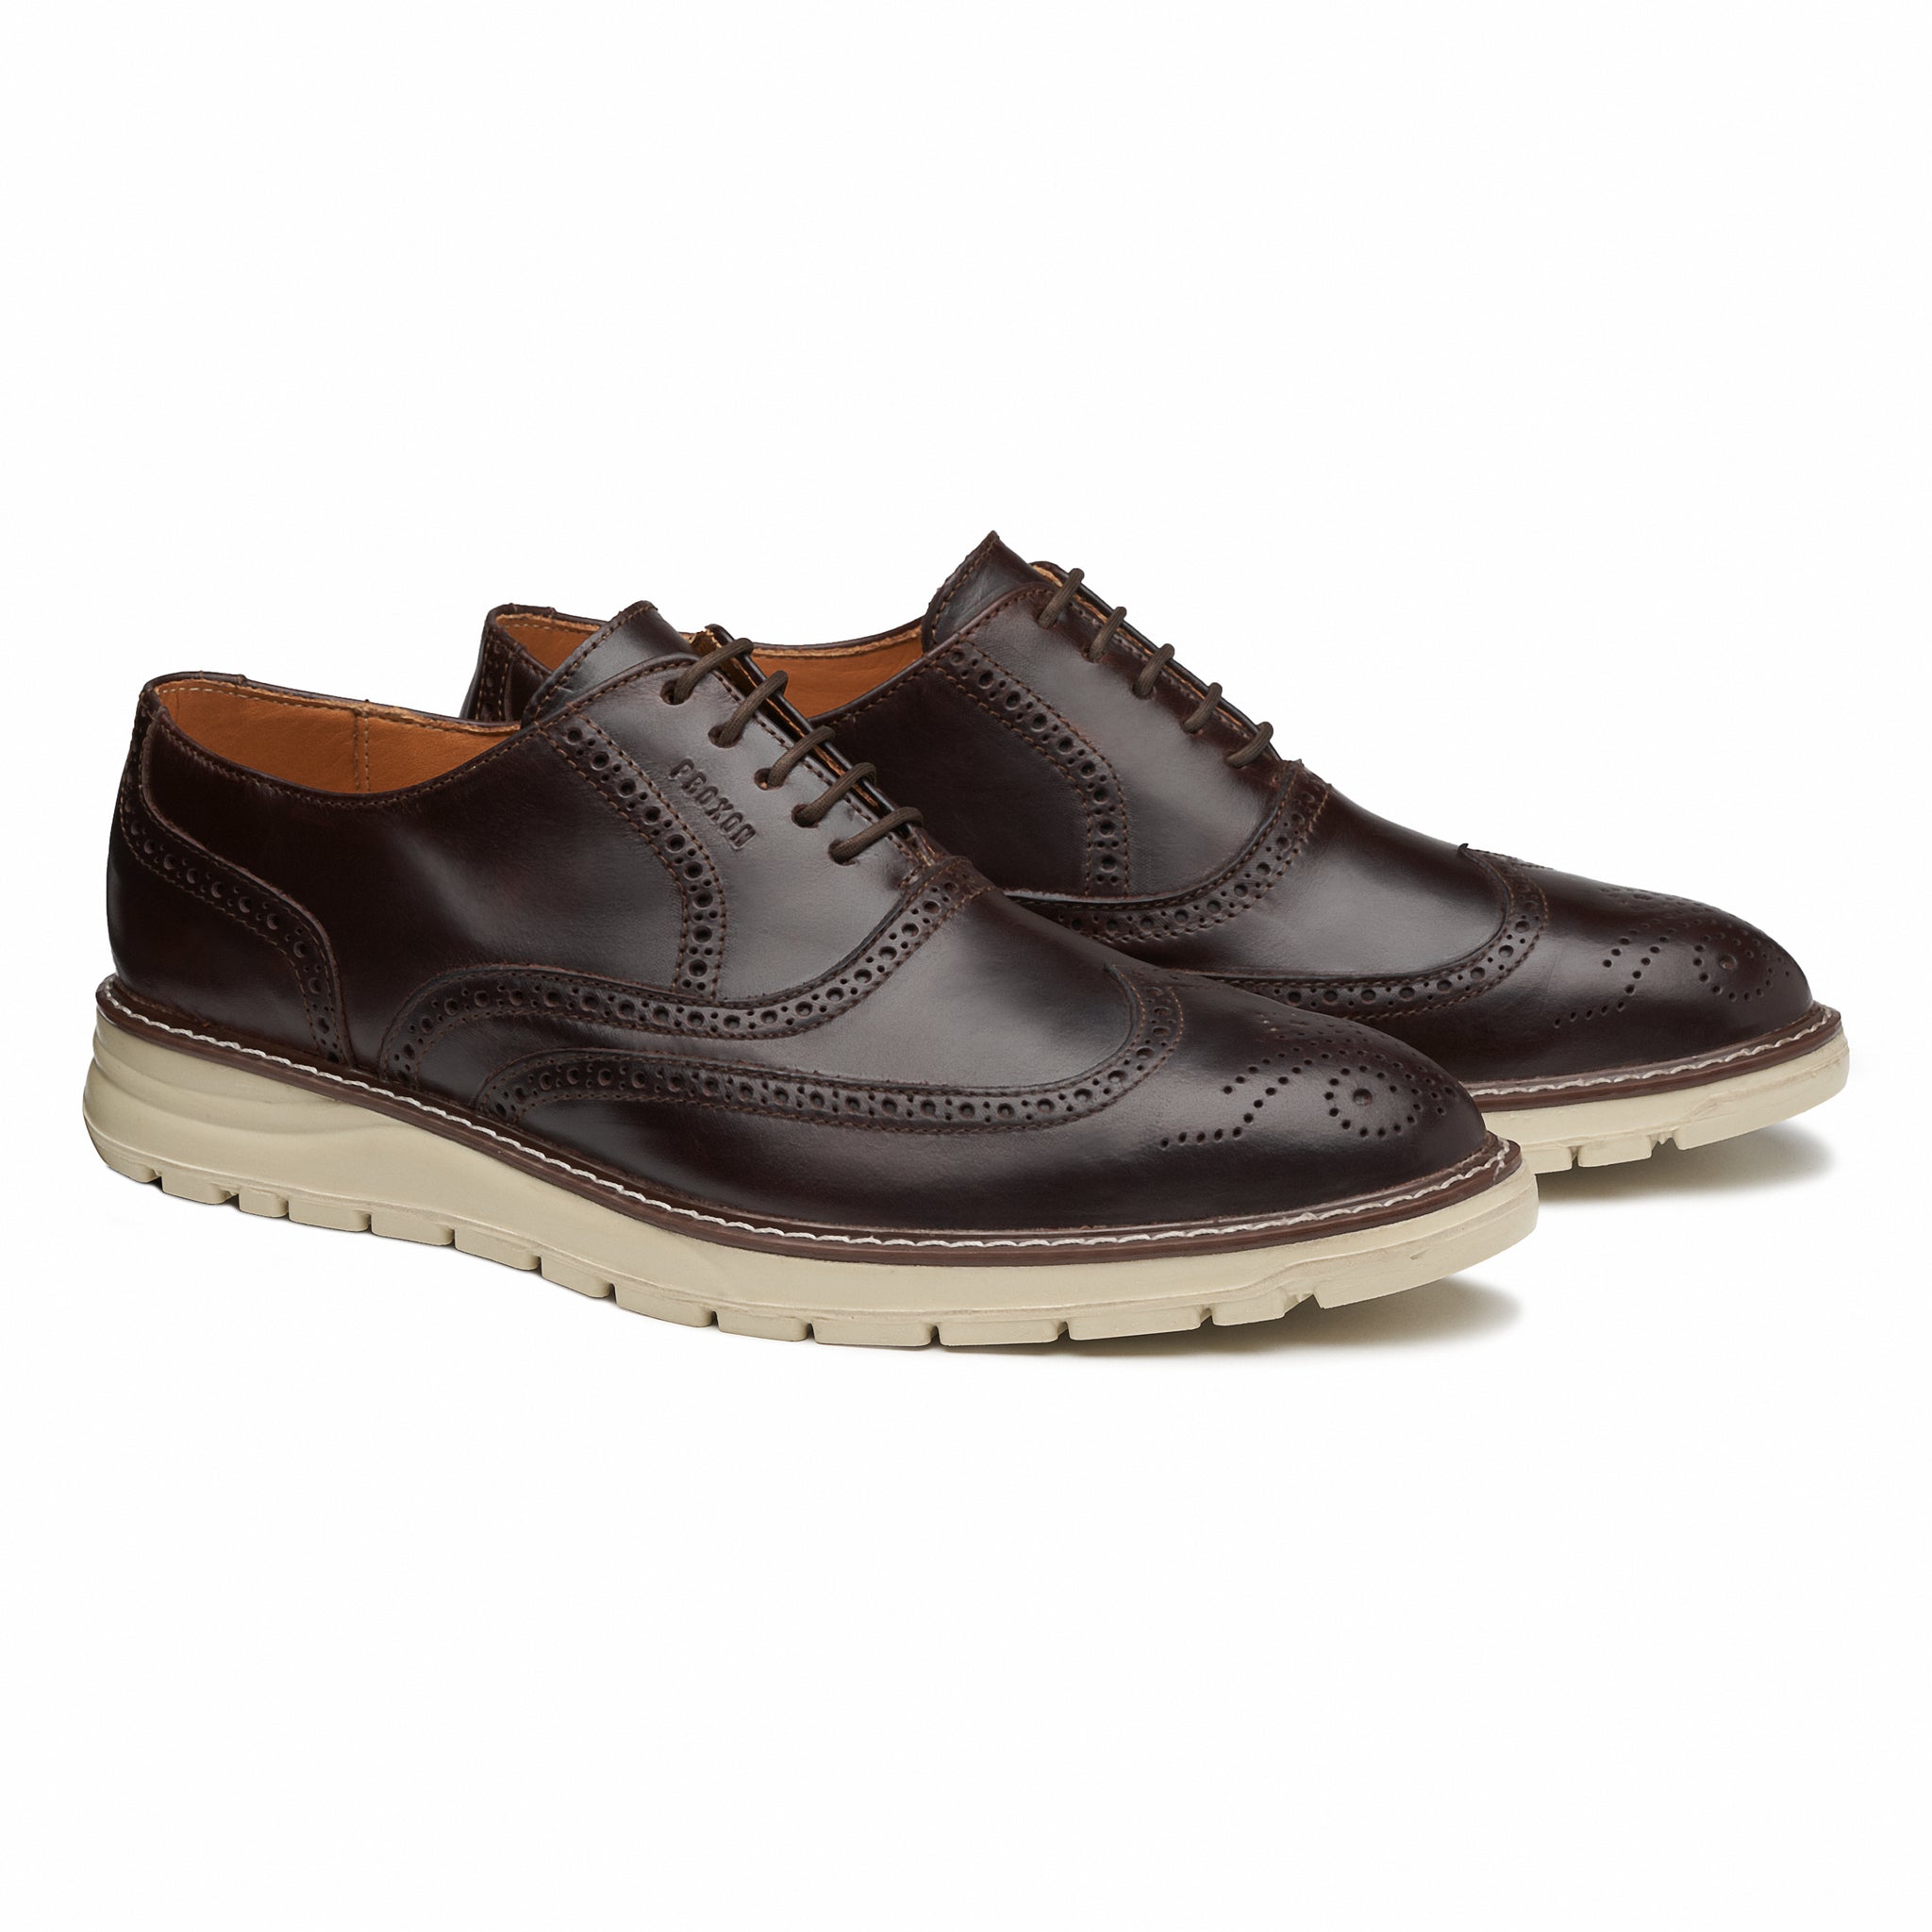 Work Boots | Steel Toed Shoes | Oxford Steels